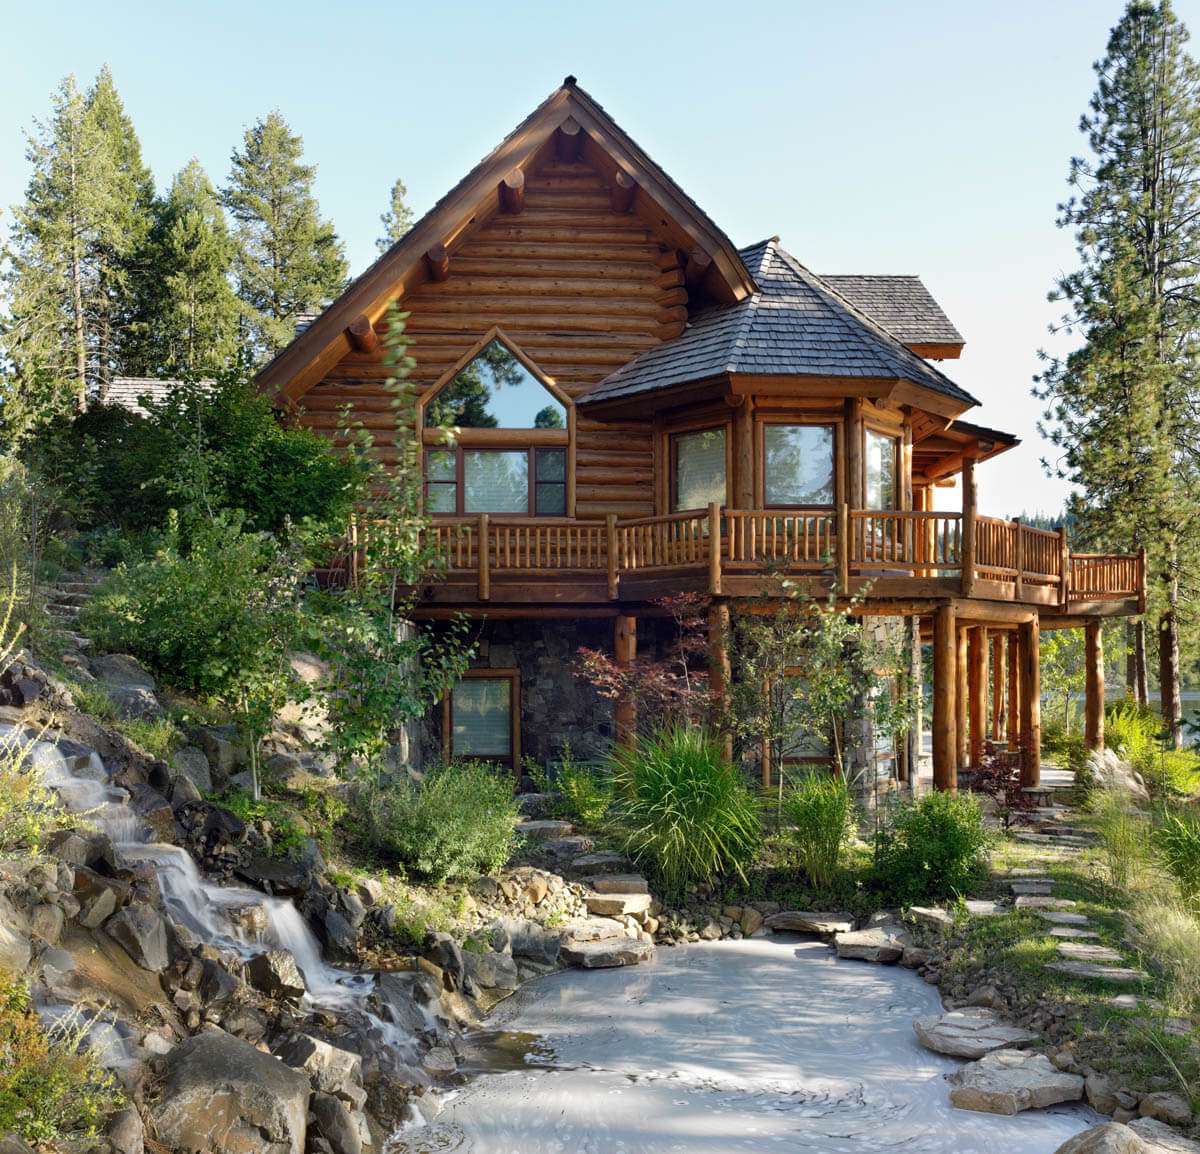 Log Home on Coeur d'Alene Lake, by architectural photographer Michael Notar, Shutterworks Film & Photography